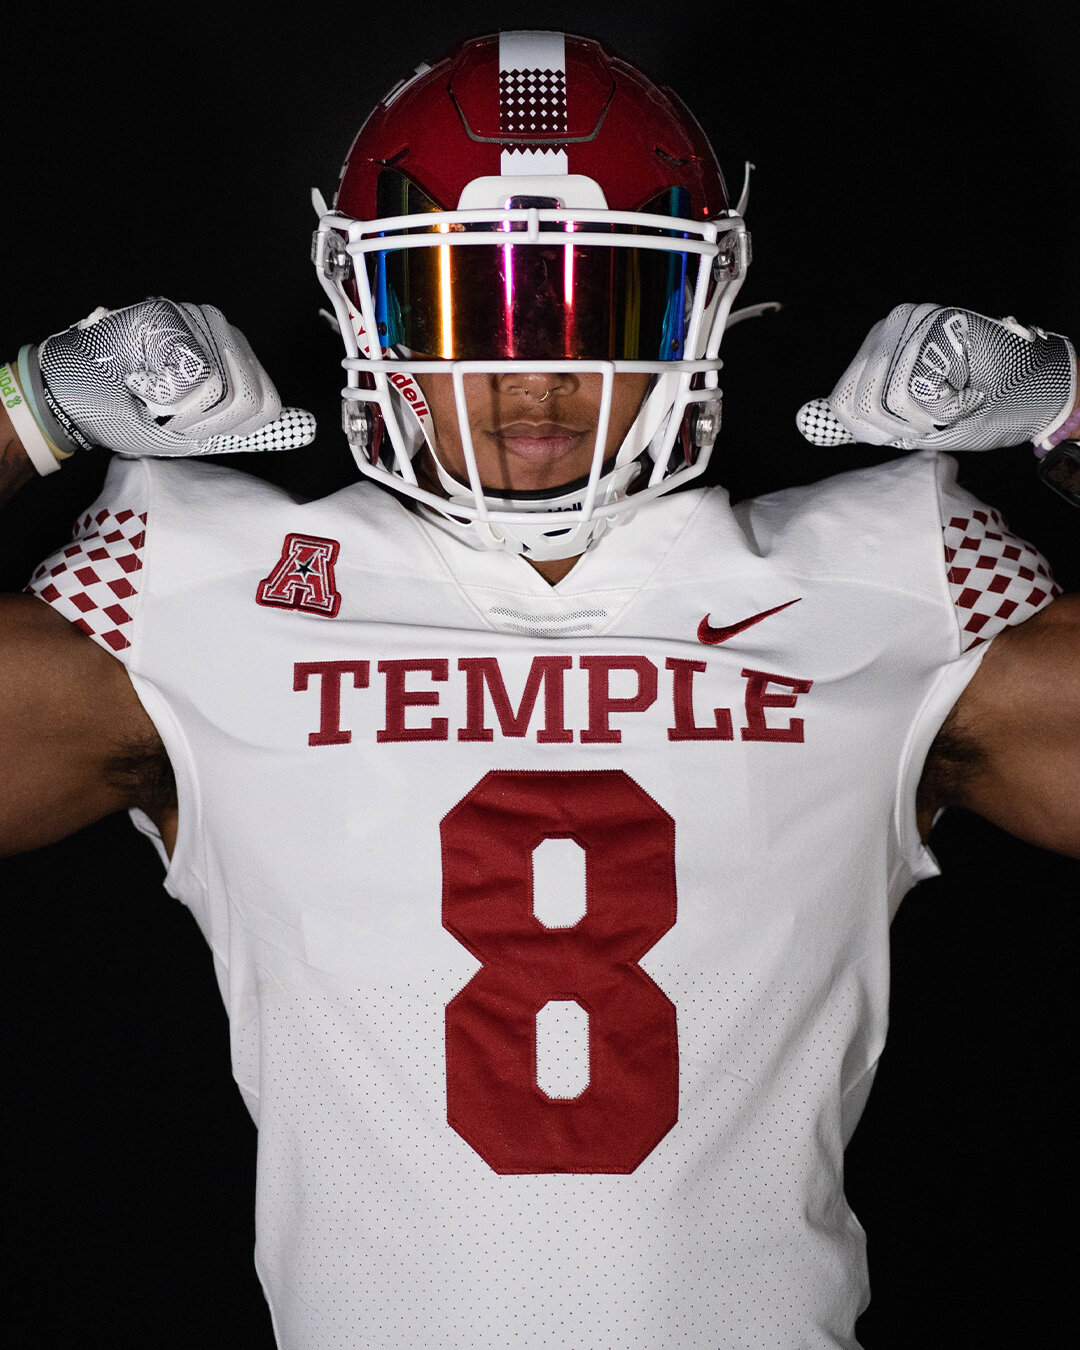 New Nike Uniforms for Temple Football 